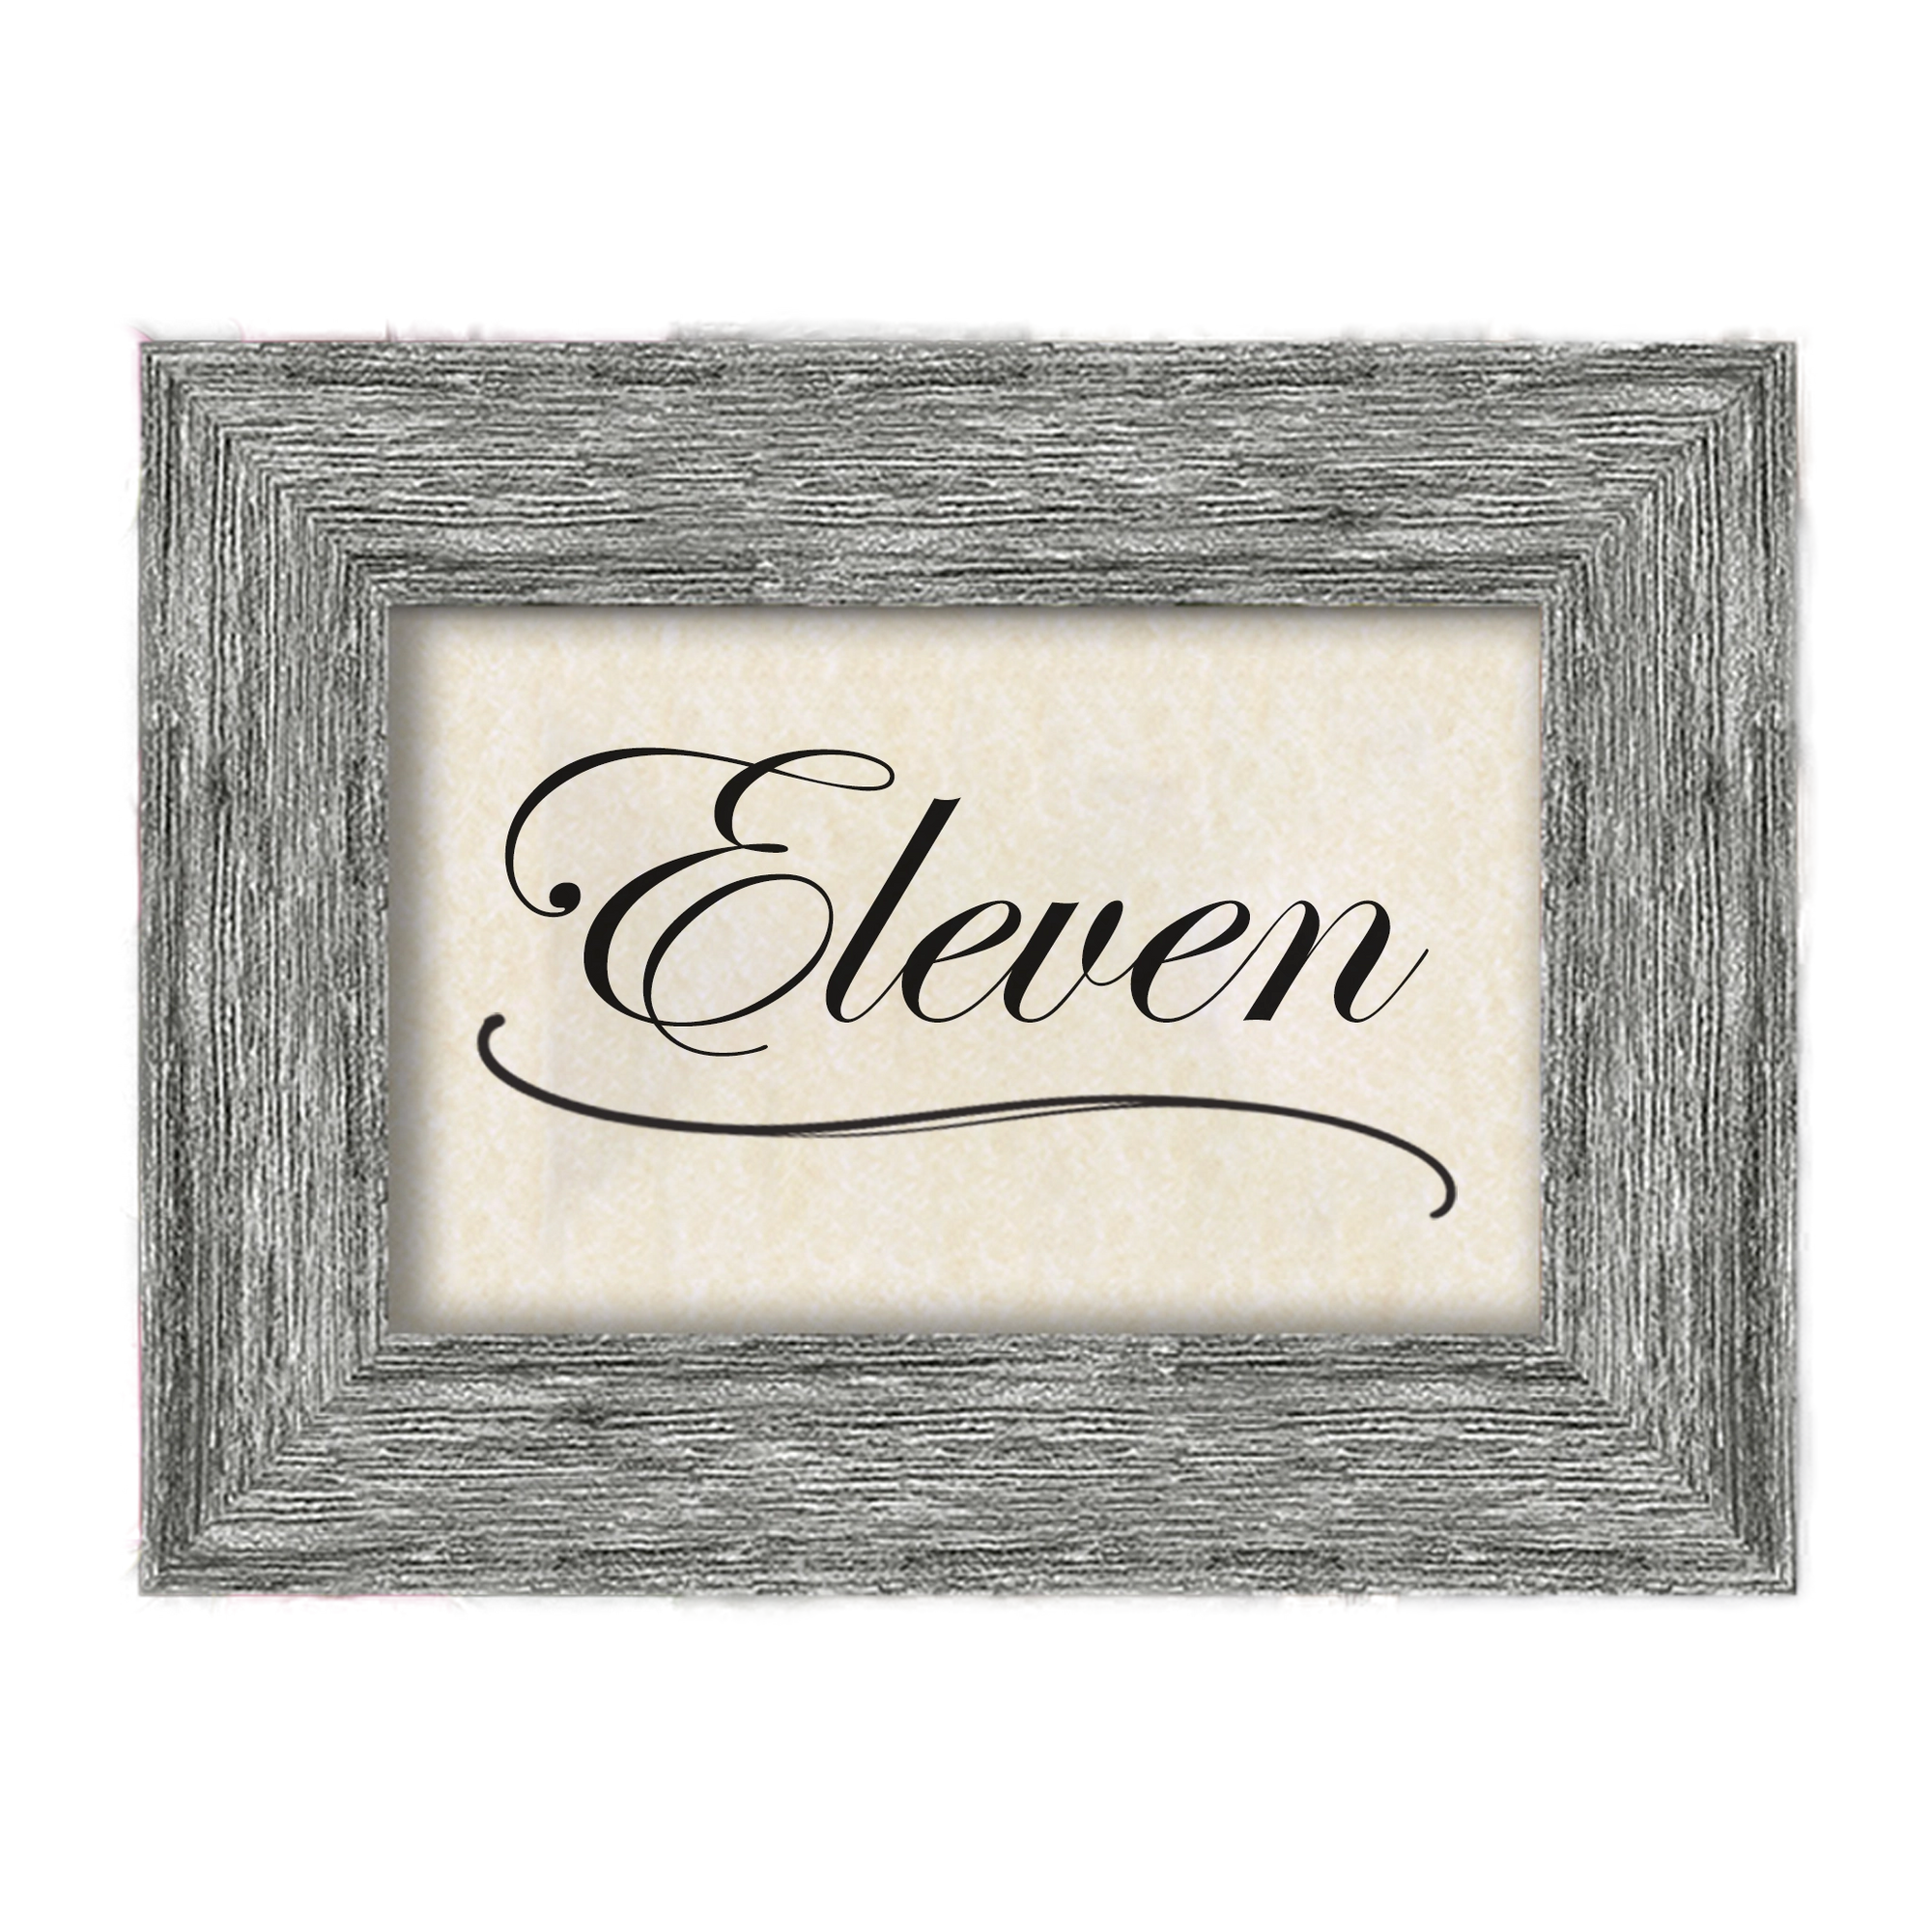 Driftwood Wooden Table Number Frame - Grey